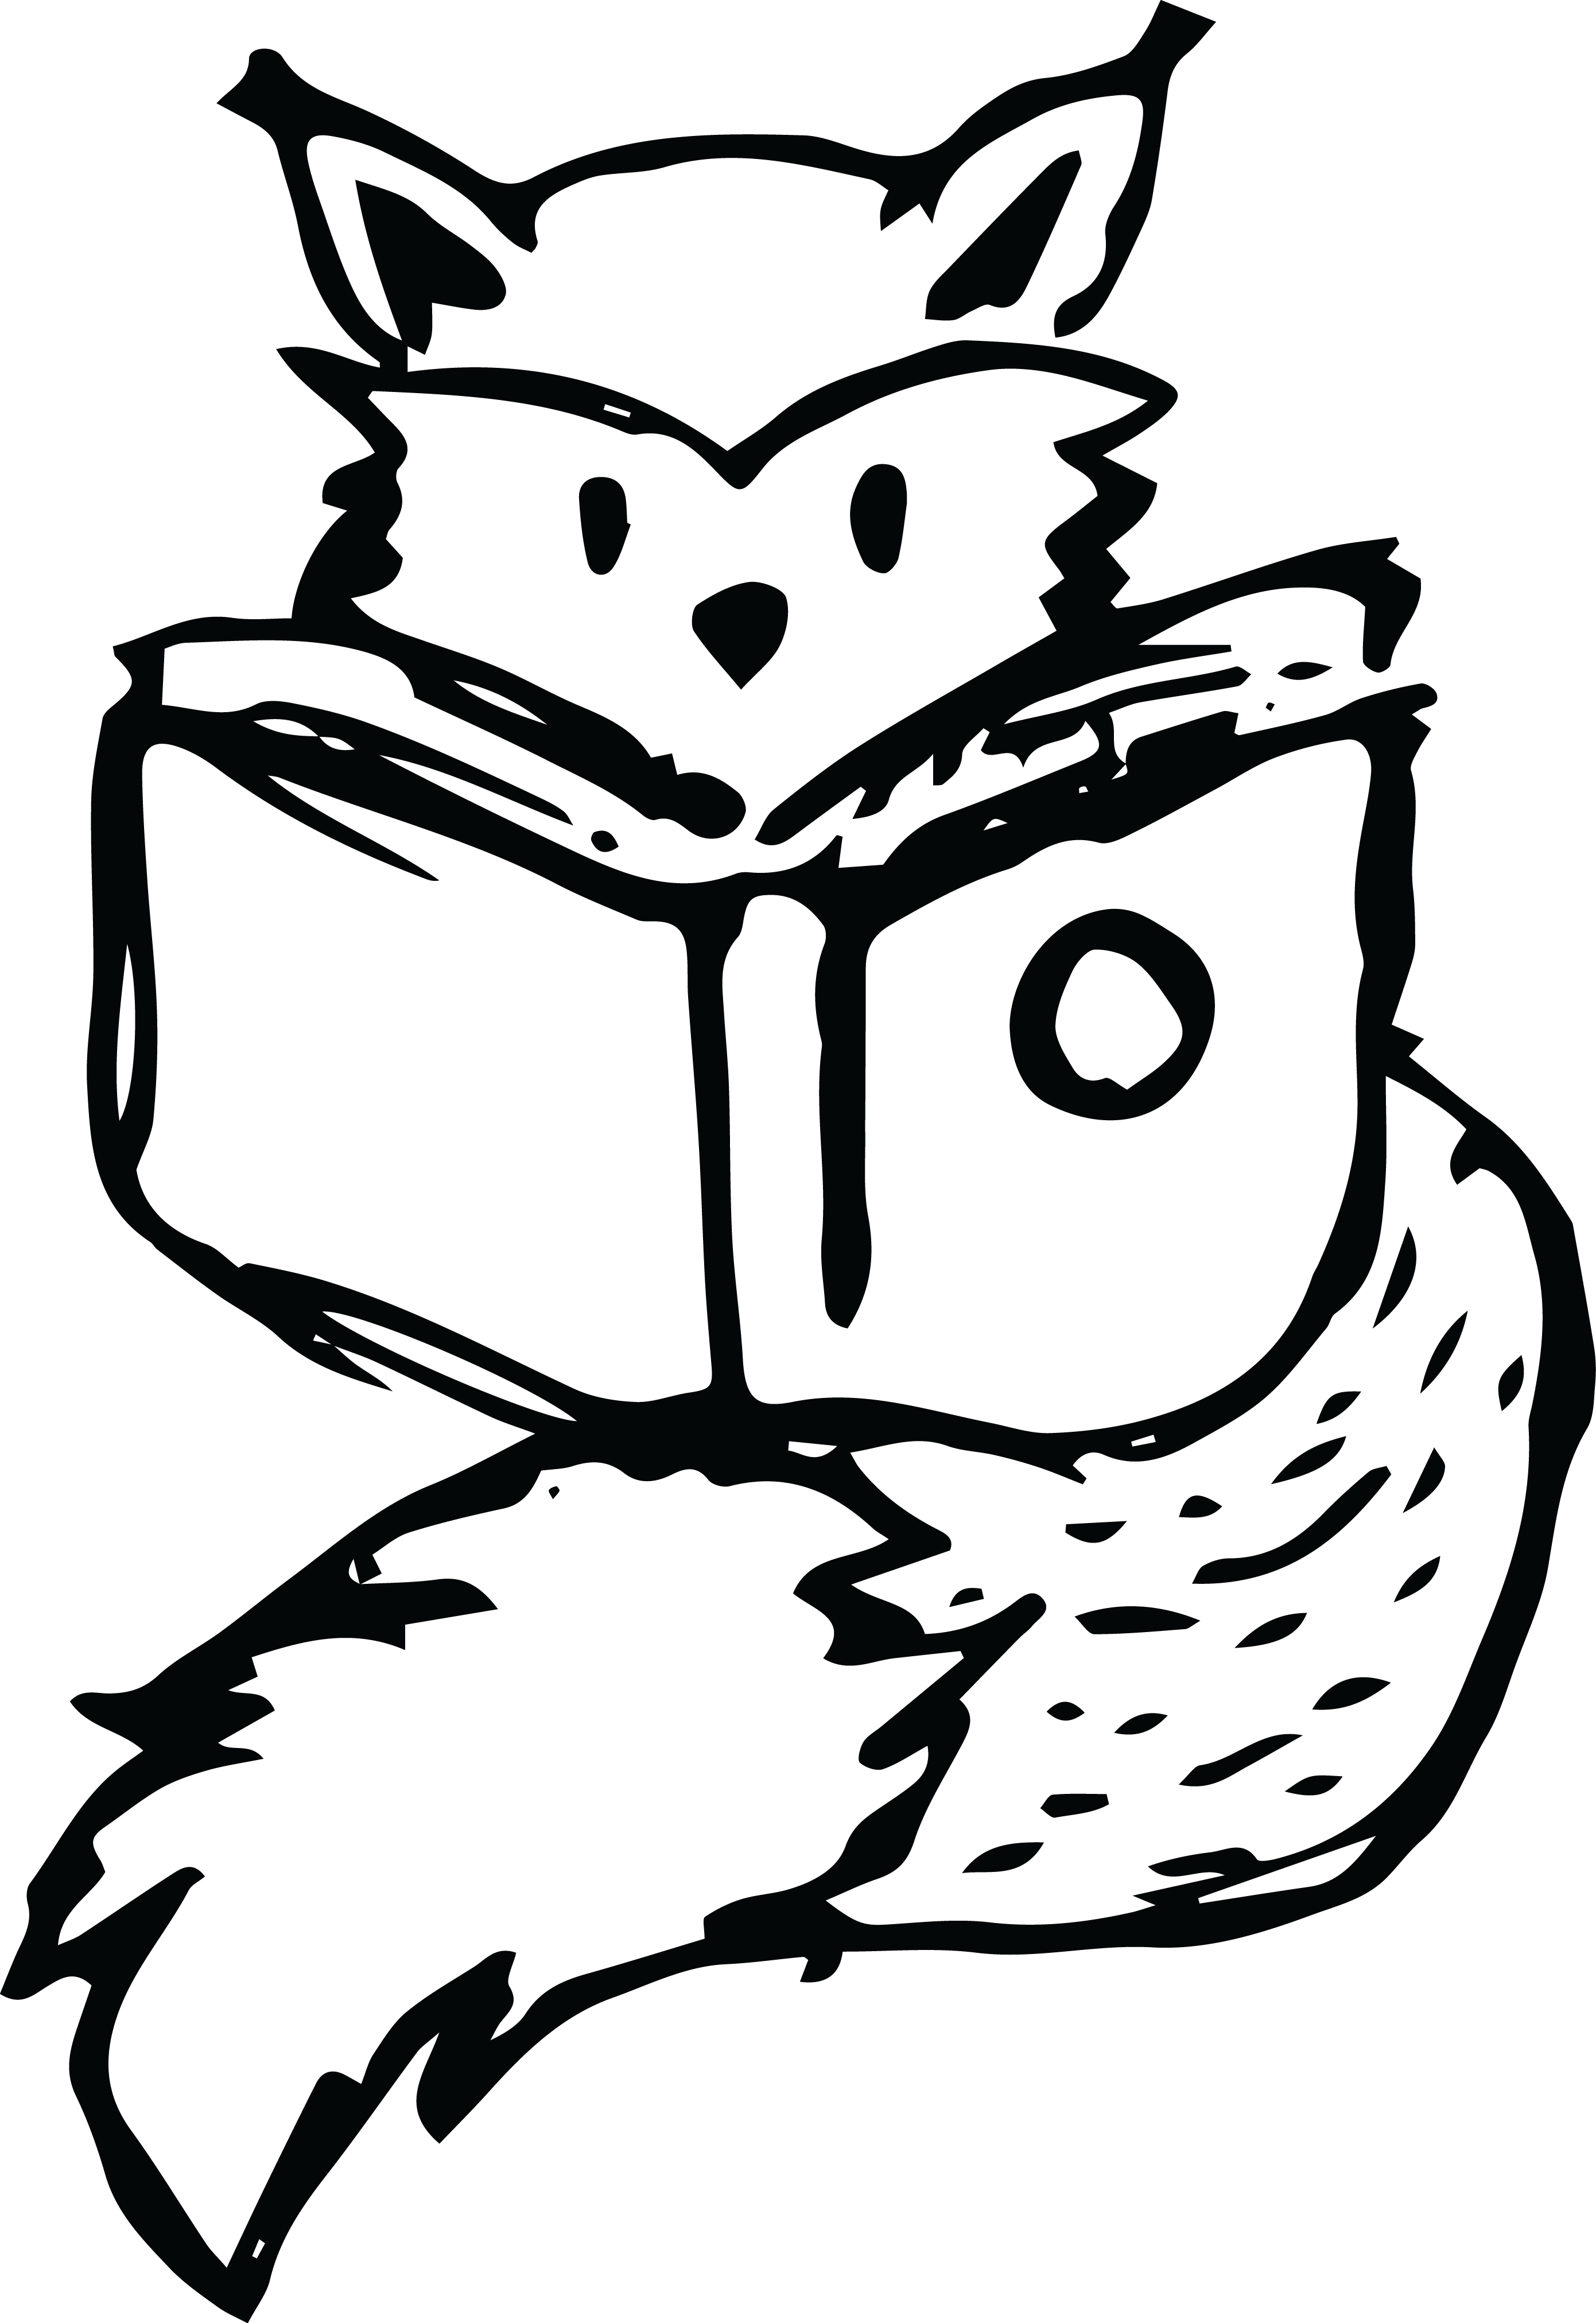 literacy clipart black and white